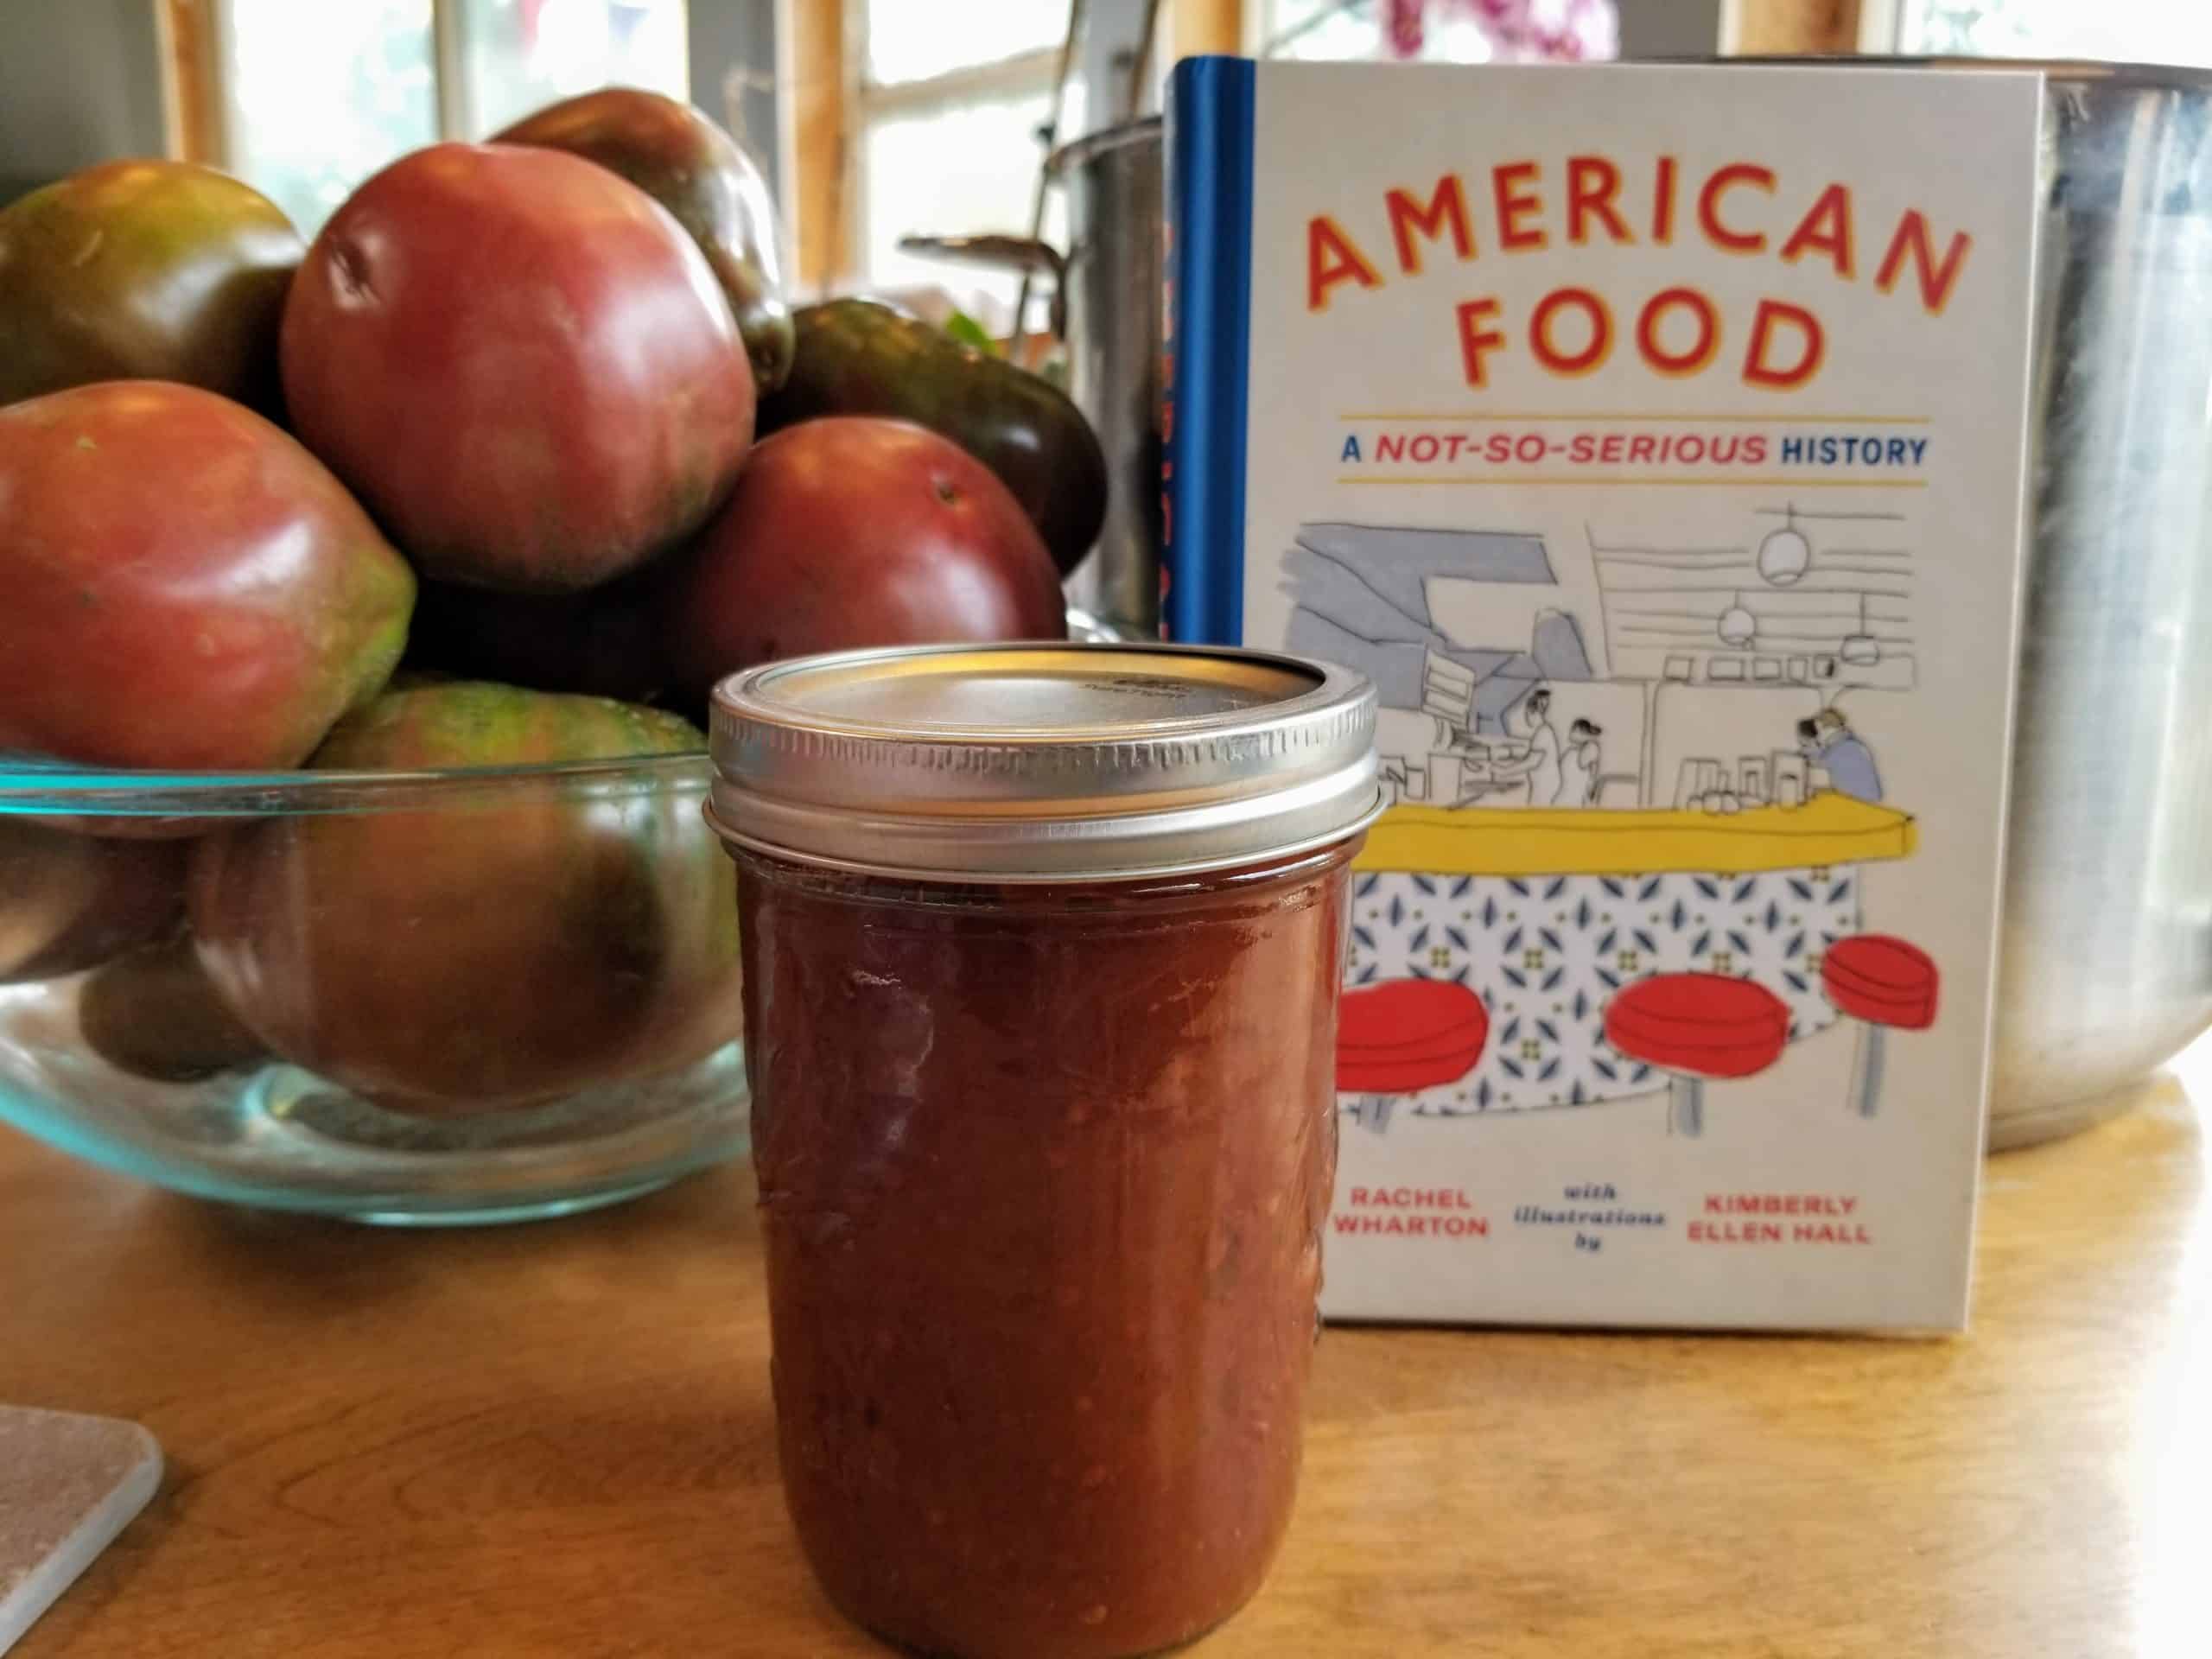 American Food by Rachel Wharton – Review and a Recipe for Homemade Ketchup